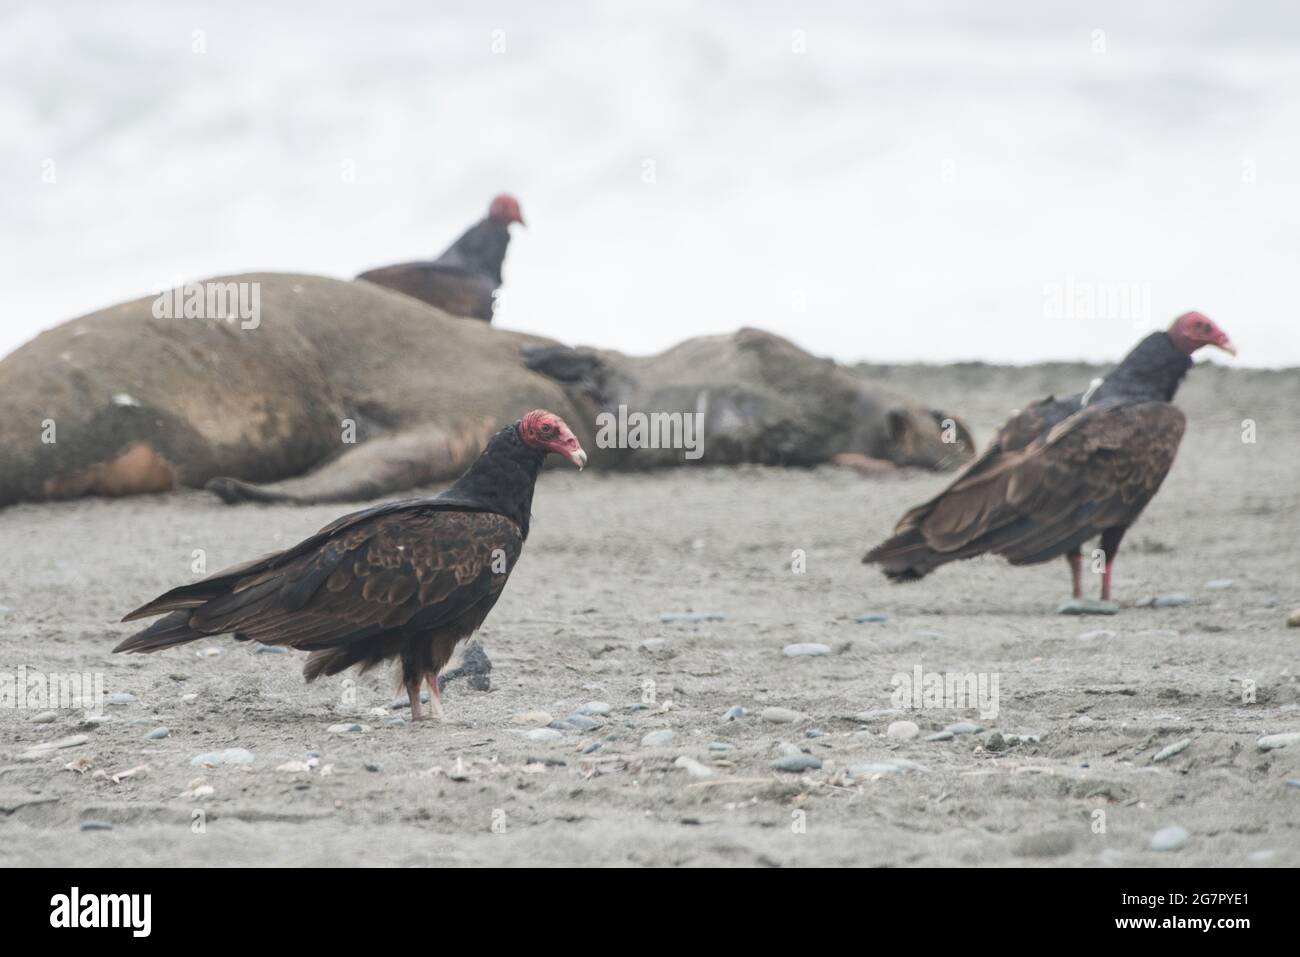 Turkey vultures (Cathartes aura) standing around the carcass of a dead marine mammal they had been feeding on. Stock Photo